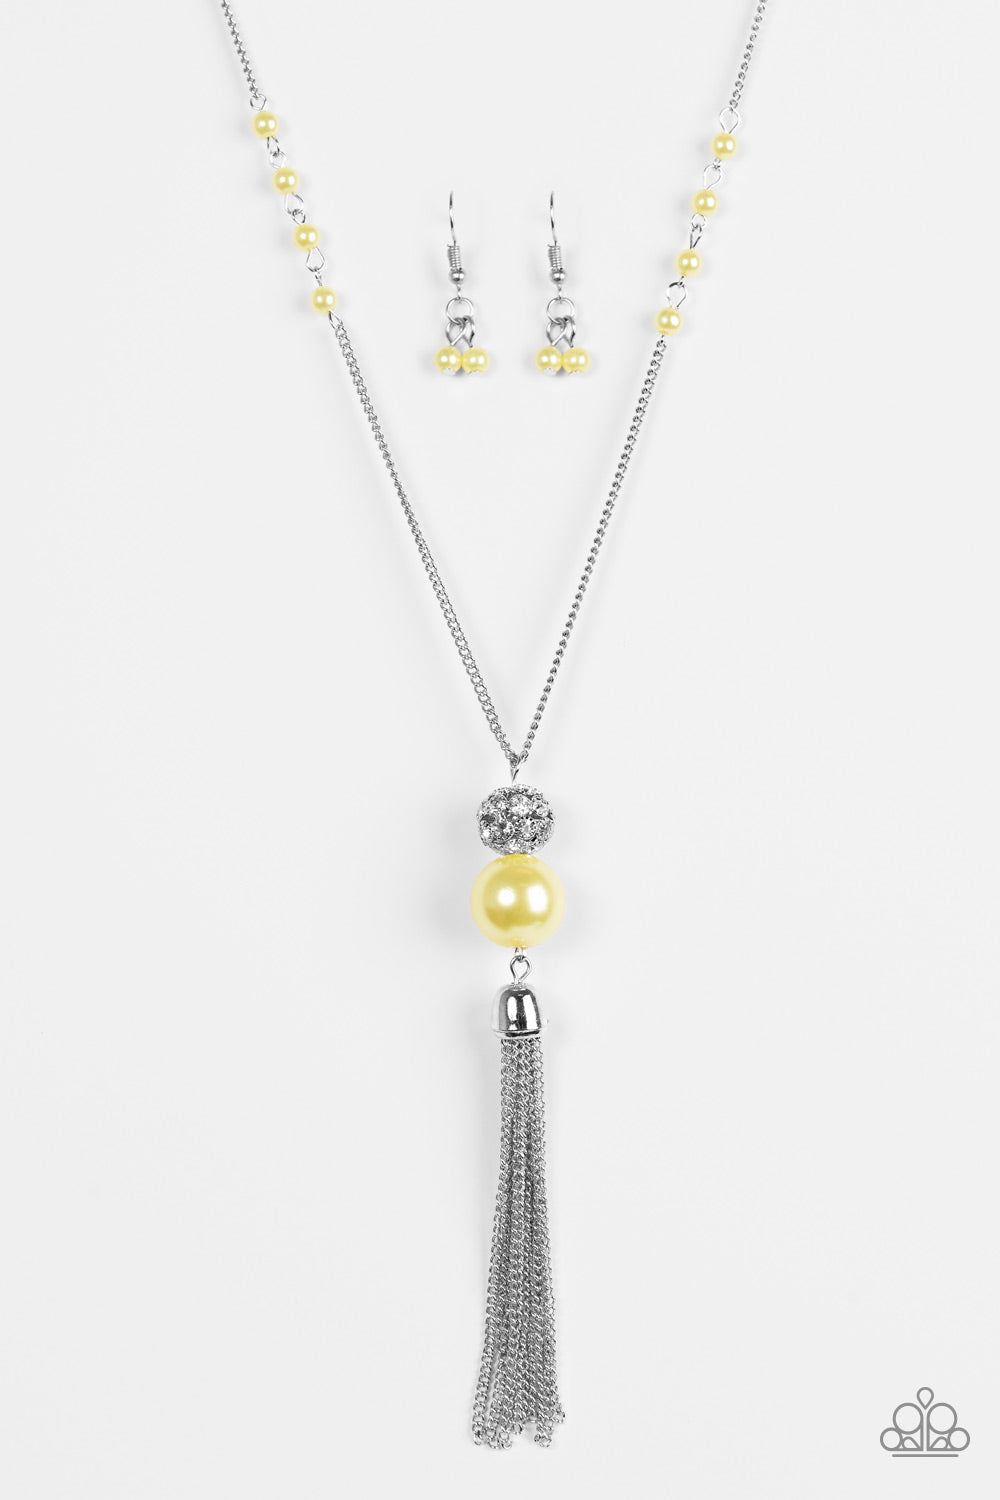 The Only Show In Town - Yellow Necklace/Earring set